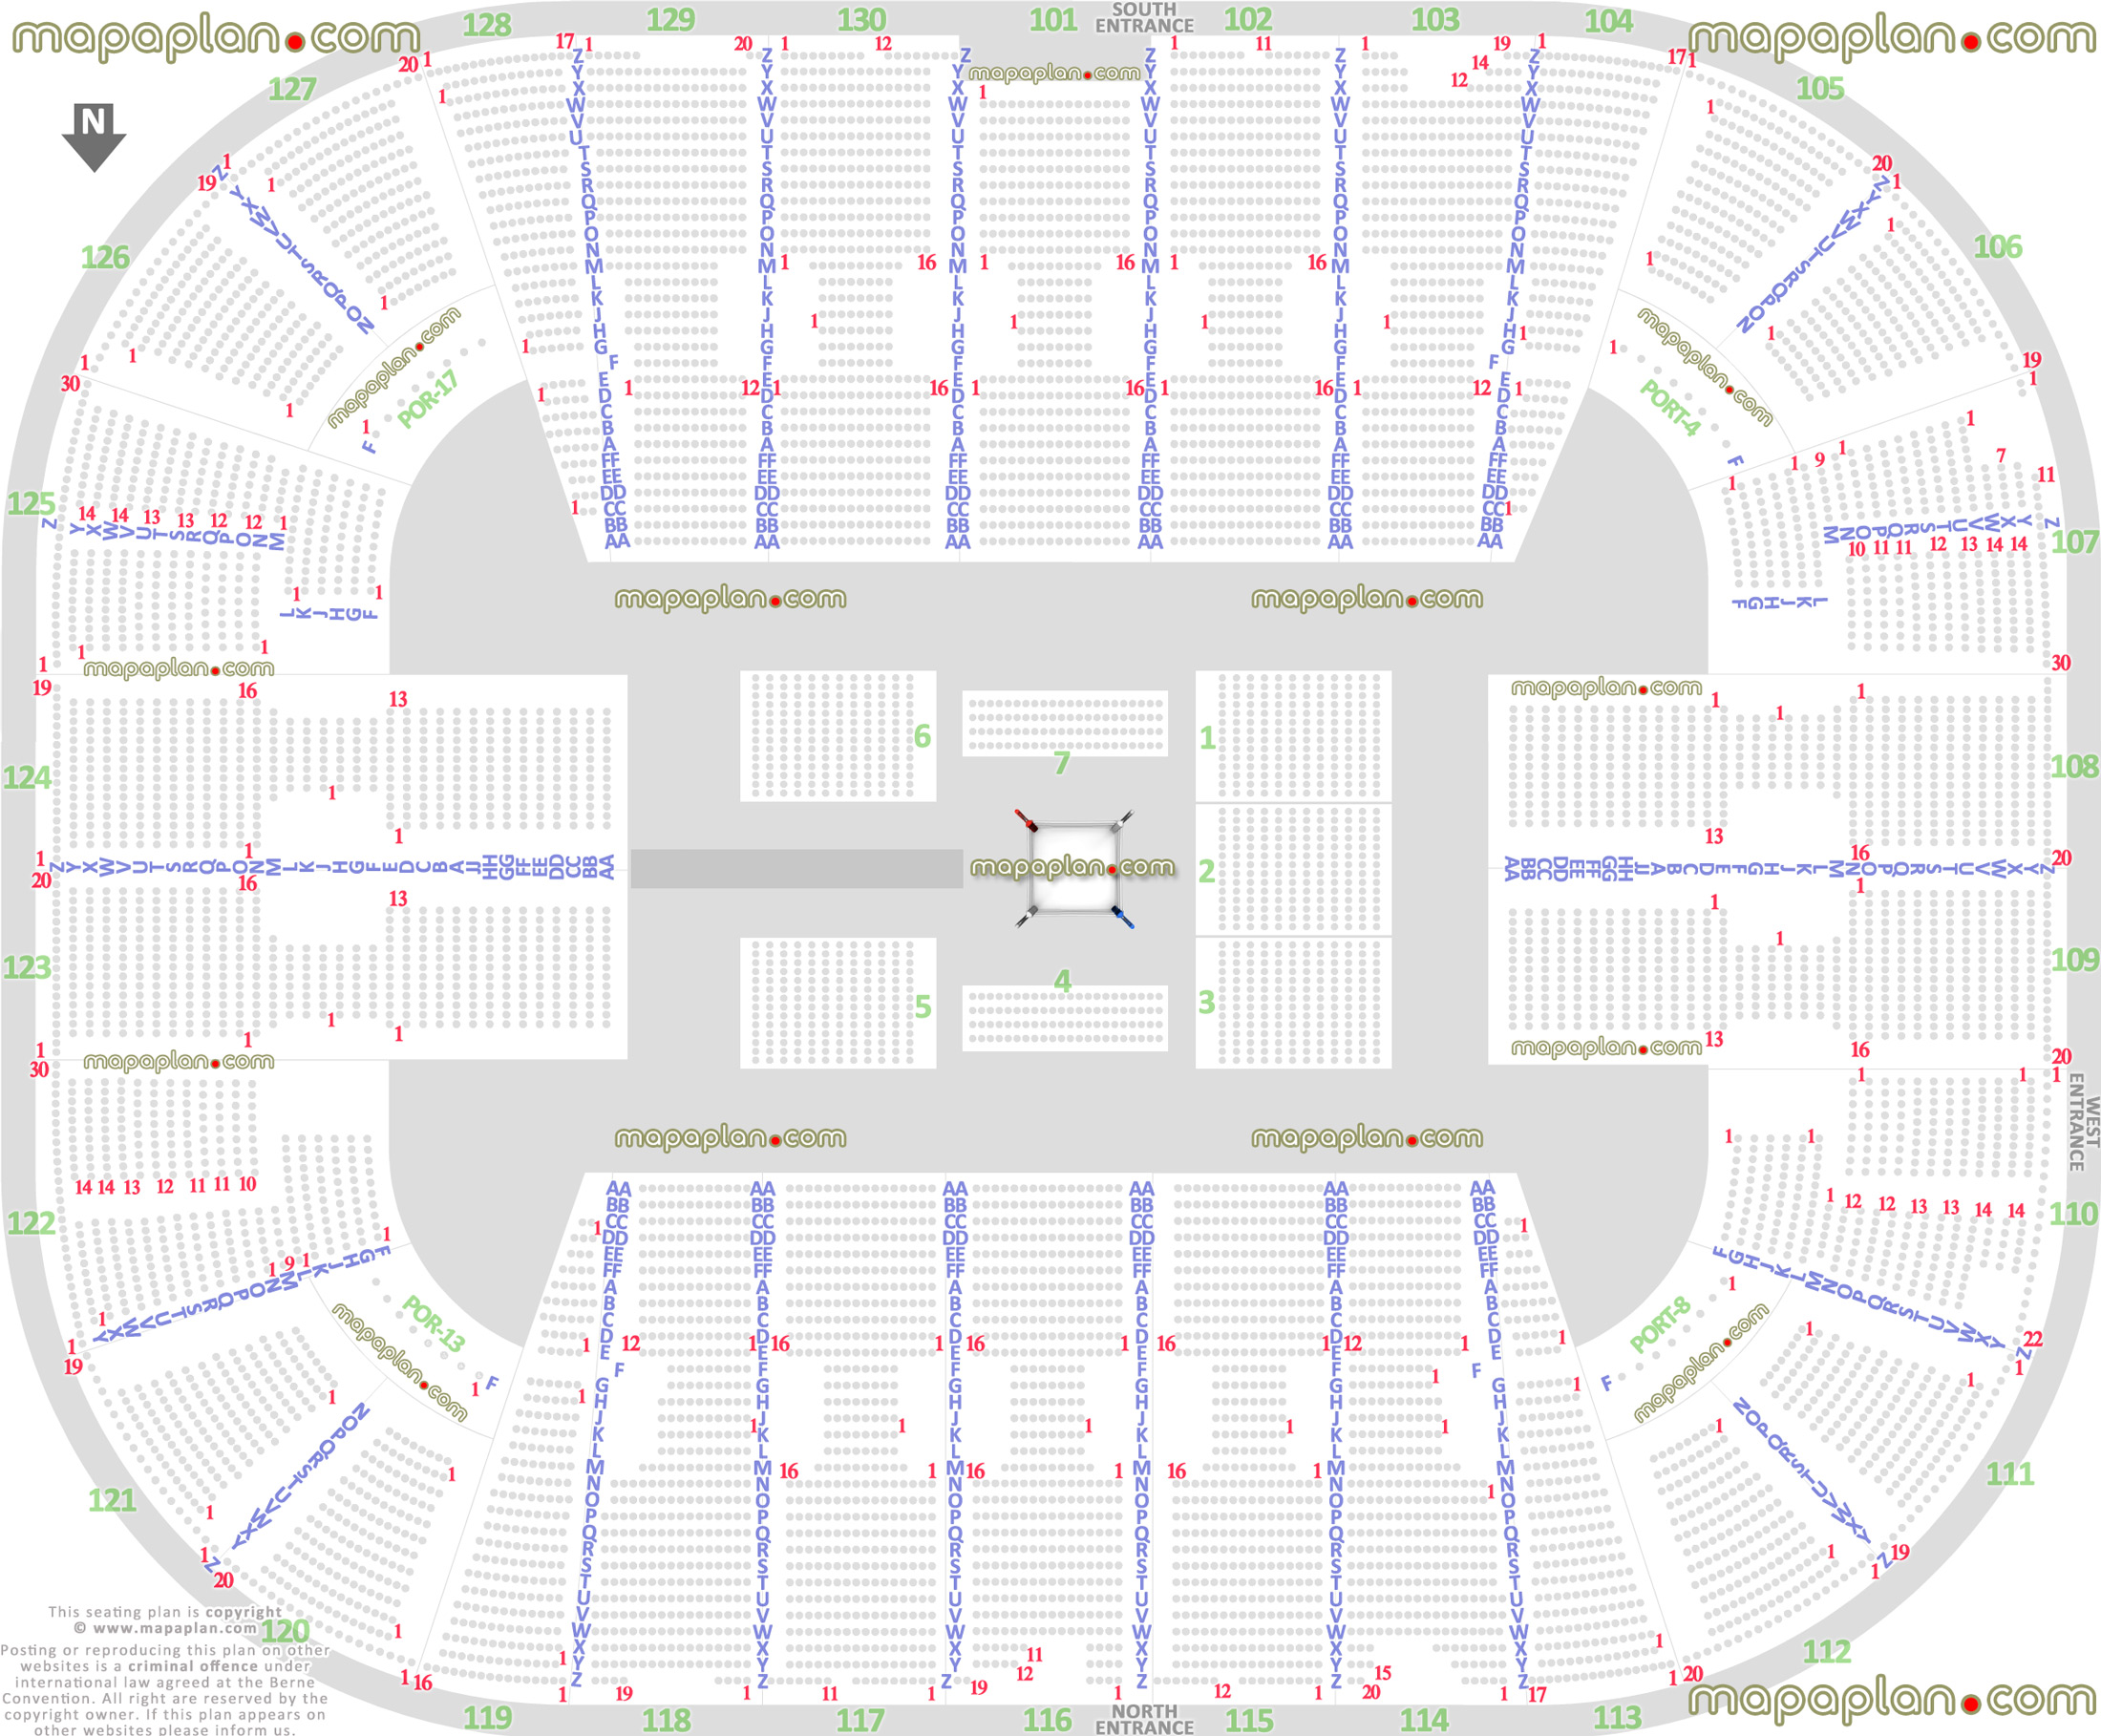 wwe wrestling boxing match events map row 360 round ring floor configuration how many rows sections 101 102 103 104 105 106 107 108 109 110 111 112 113 114 115 116 117 118 119 120 121 122 123 124 125 126 127 128 129 130 Fairfax EagleBank Arena seating chart